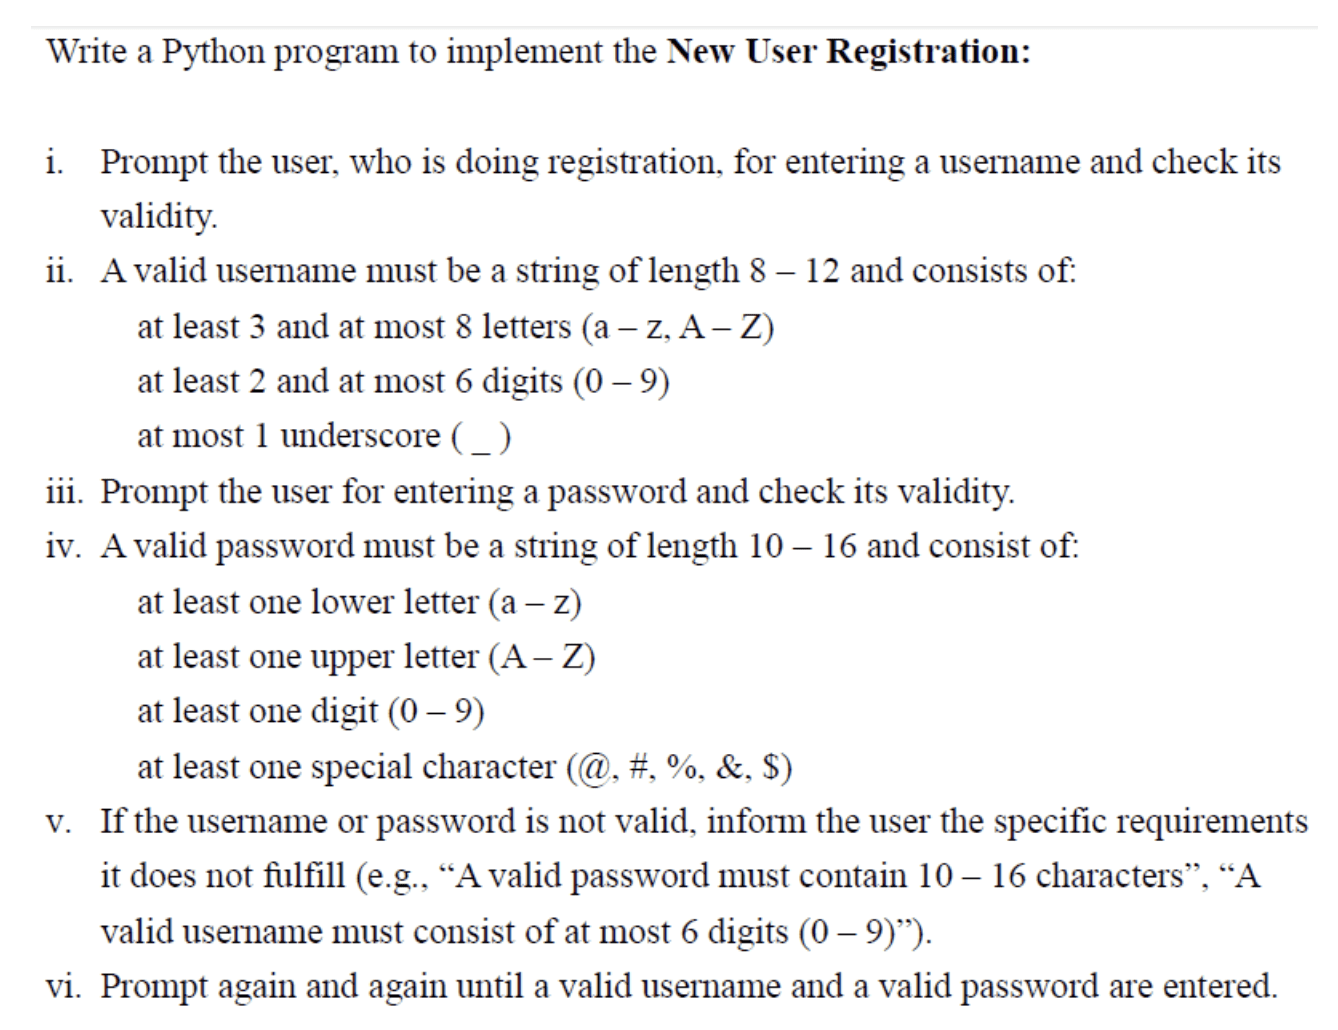 Write a Python program to implement the New User Registration: i. Prompt the user, who is doing registration, for entering a username and check its validity. ii. A valid username must be a string of length 8-12 and consists of: - at least 3 and at most 8 letters (a-z, A-Z) - at least 2 and at most 6 digits (0-9) - at most 1 underscore (_) iii. Prompt the user for entering a password and check its validity. iv. A valid password must be a string of length 10-16 and consist of: - at least one lowercase letter (a-z) - at least one uppercase letter (A-Z) - at least one digit (0-9) - at least one special character (@, #, %, &, $) v. If the username or password is not valid, inform the user of the specific requirements it does not fulfill (e.g., "A valid password must contain 10-16 characters", "A valid username must consist of at most 6 digits (0-9)"). vi. Prompt again and again until a valid username and a valid password are entered.